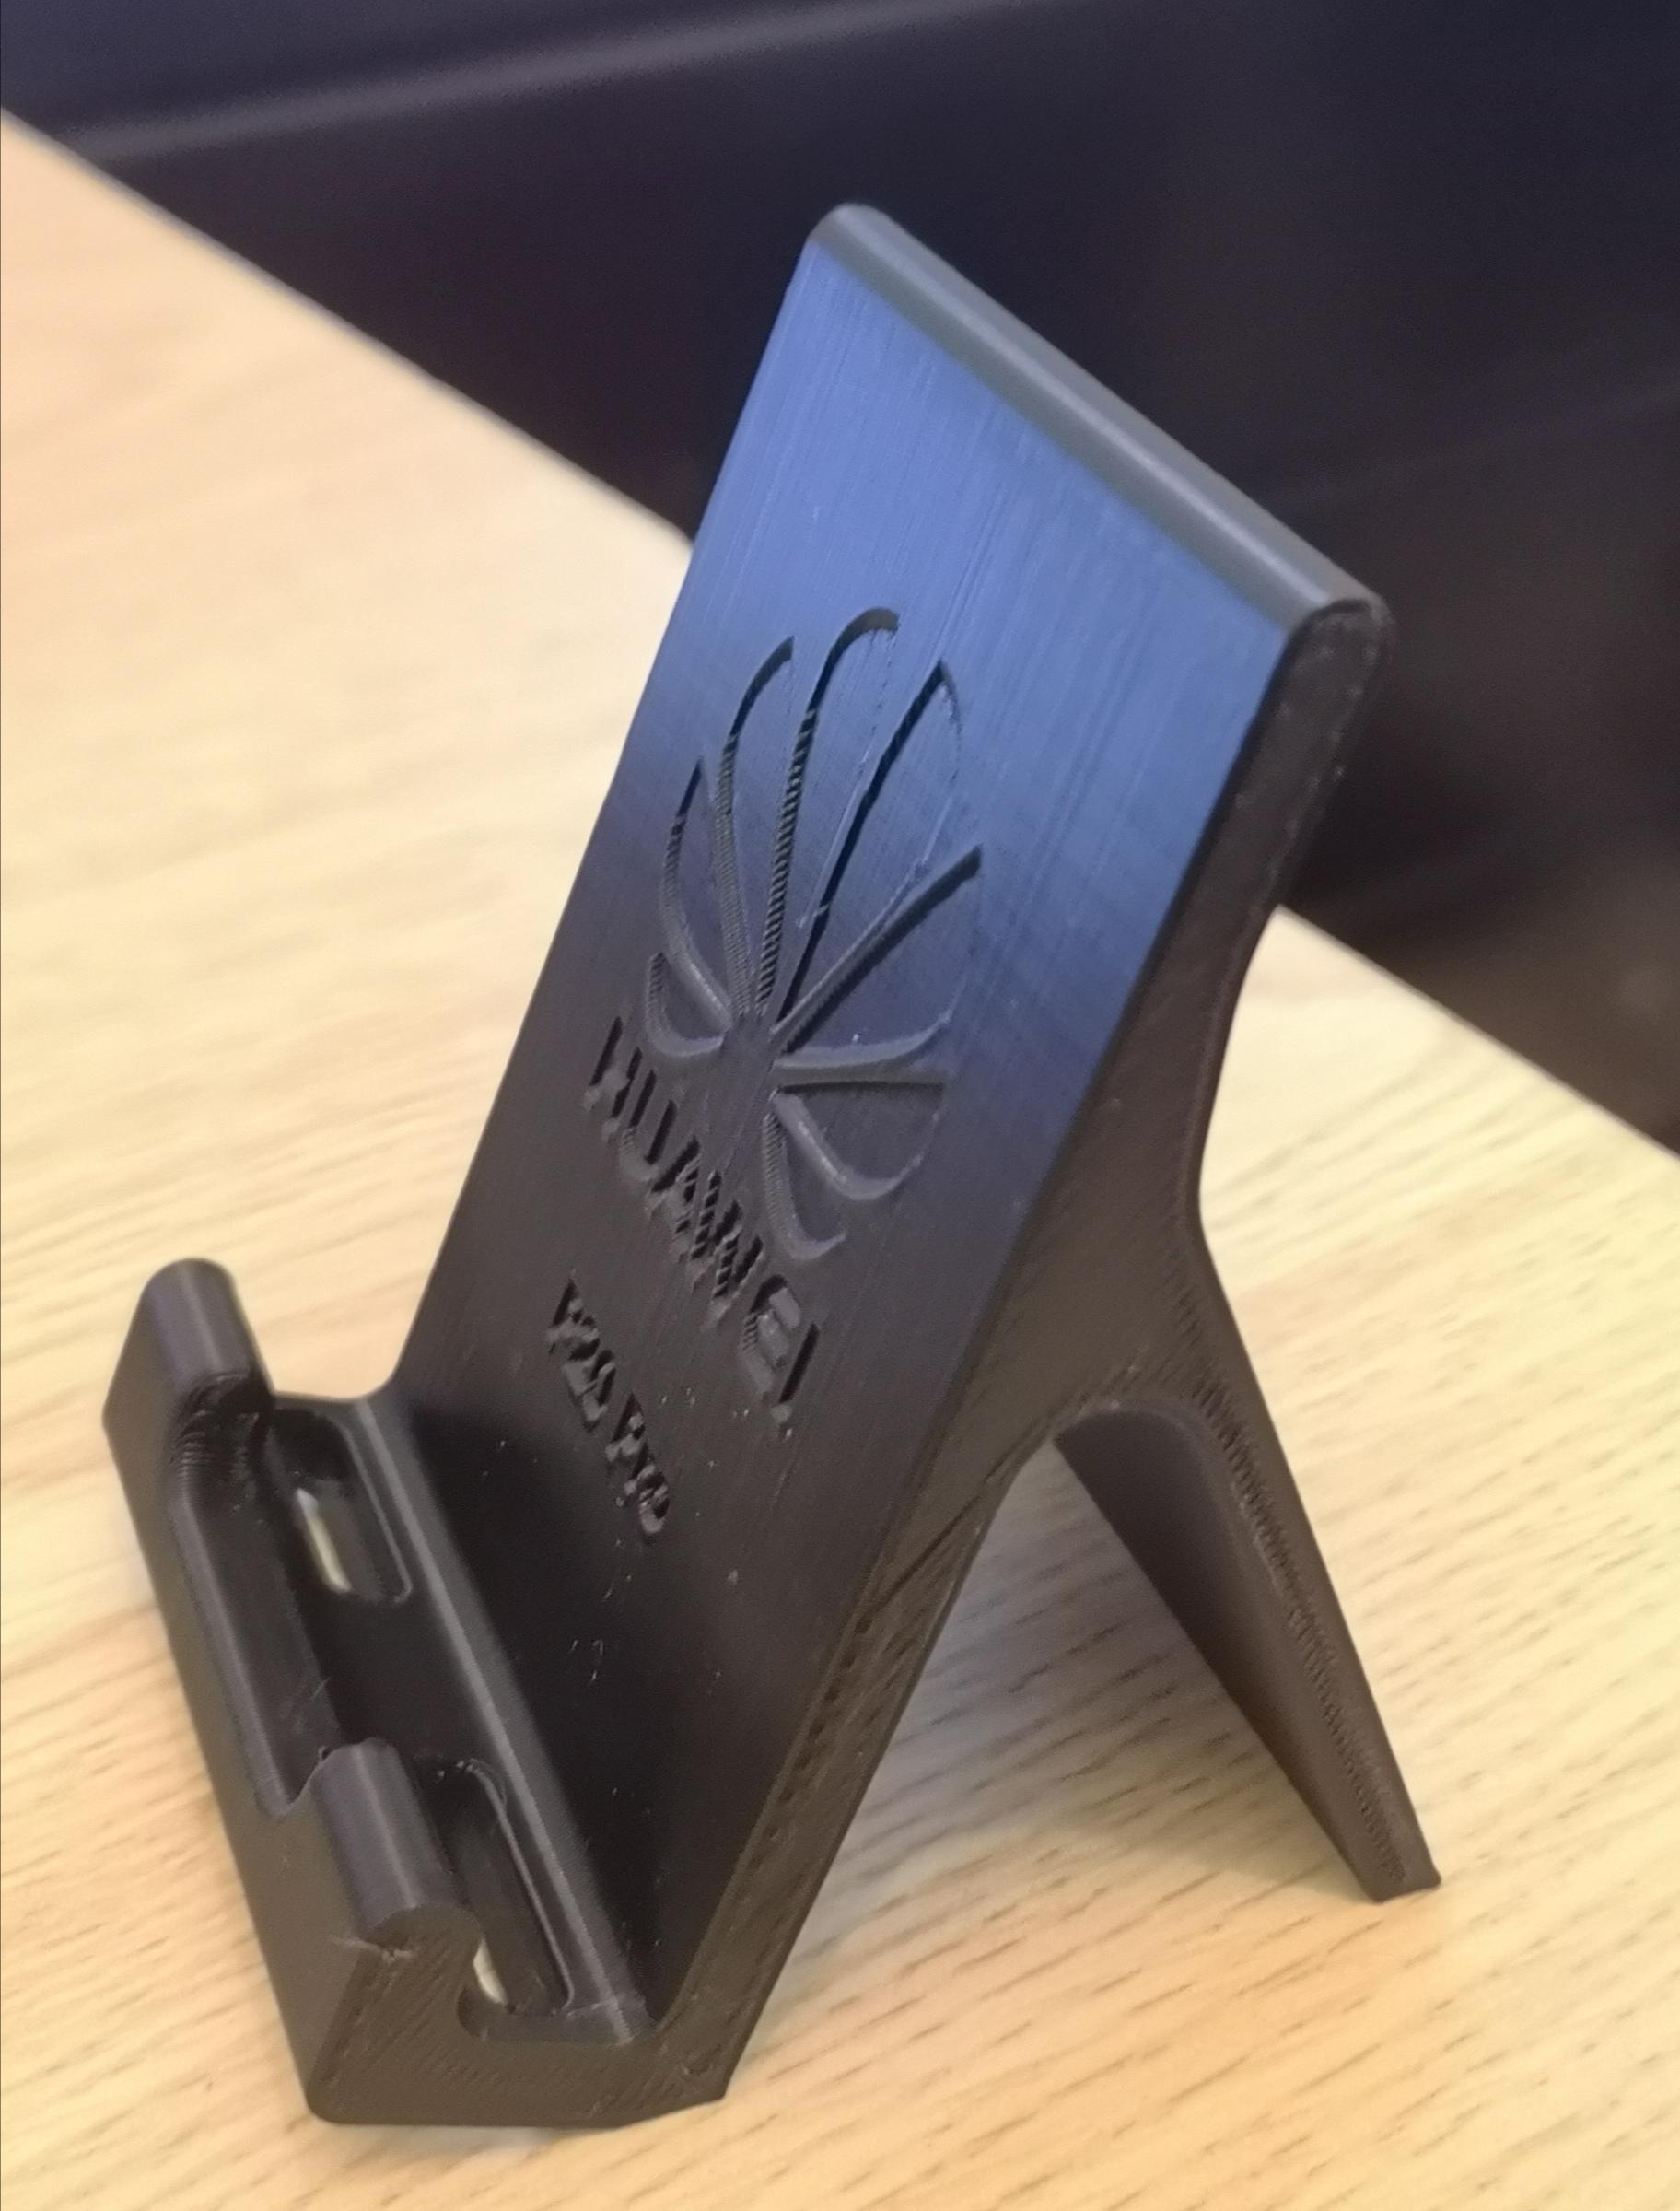 Huawei P20 PRO stand.stl 3d model